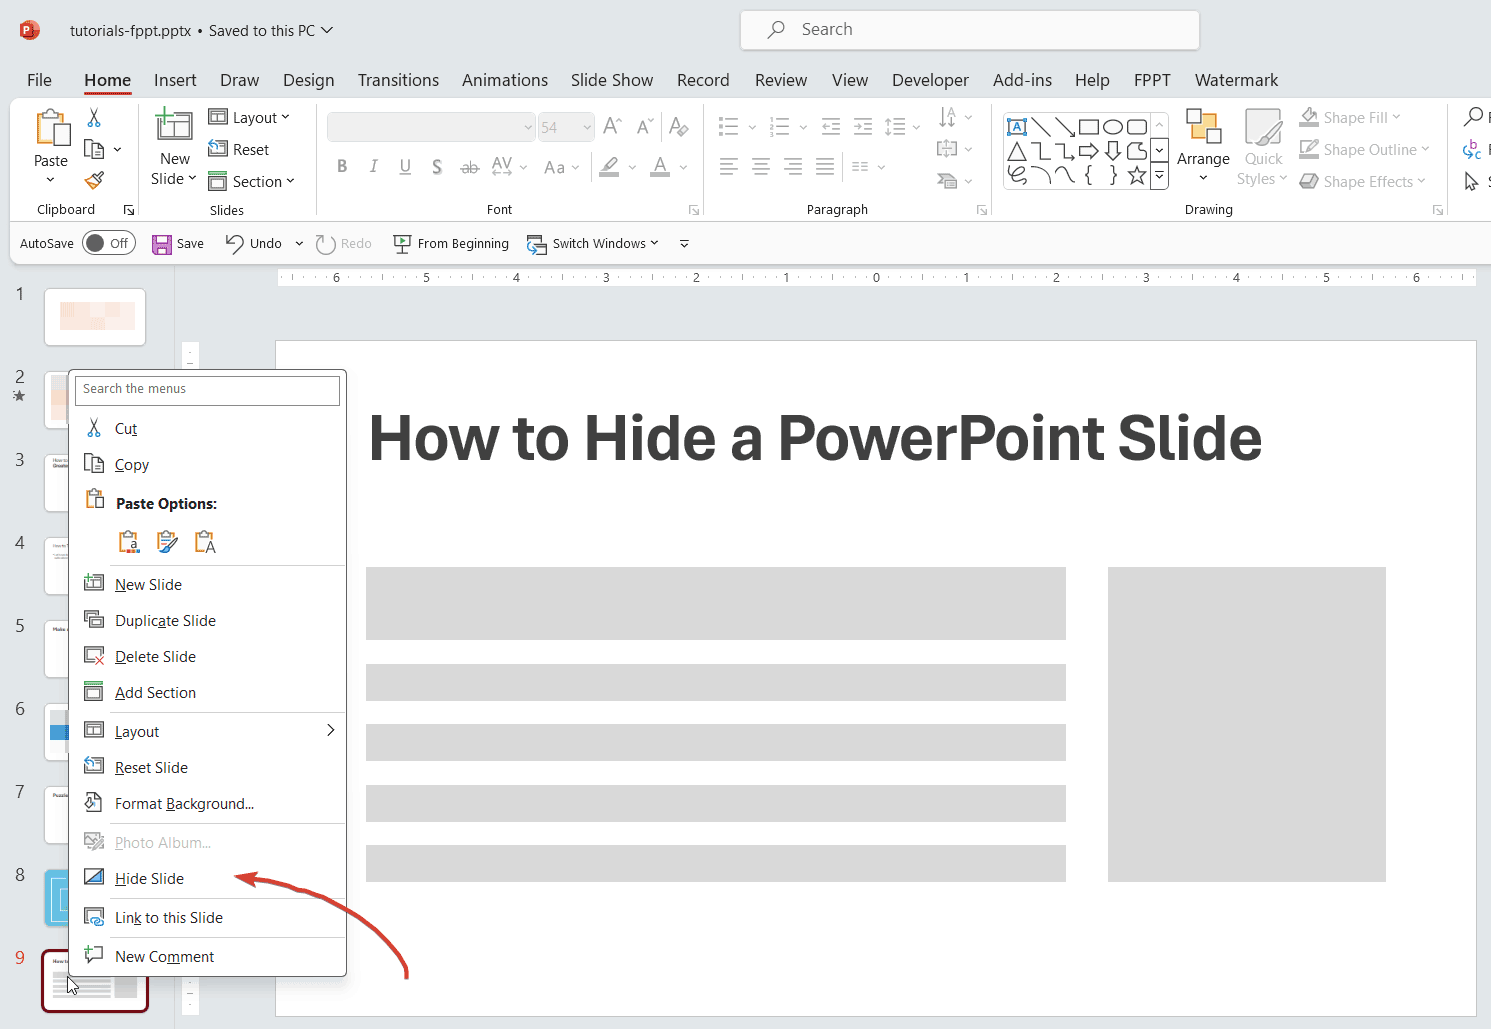 How to Hide a PowerPoint Slide